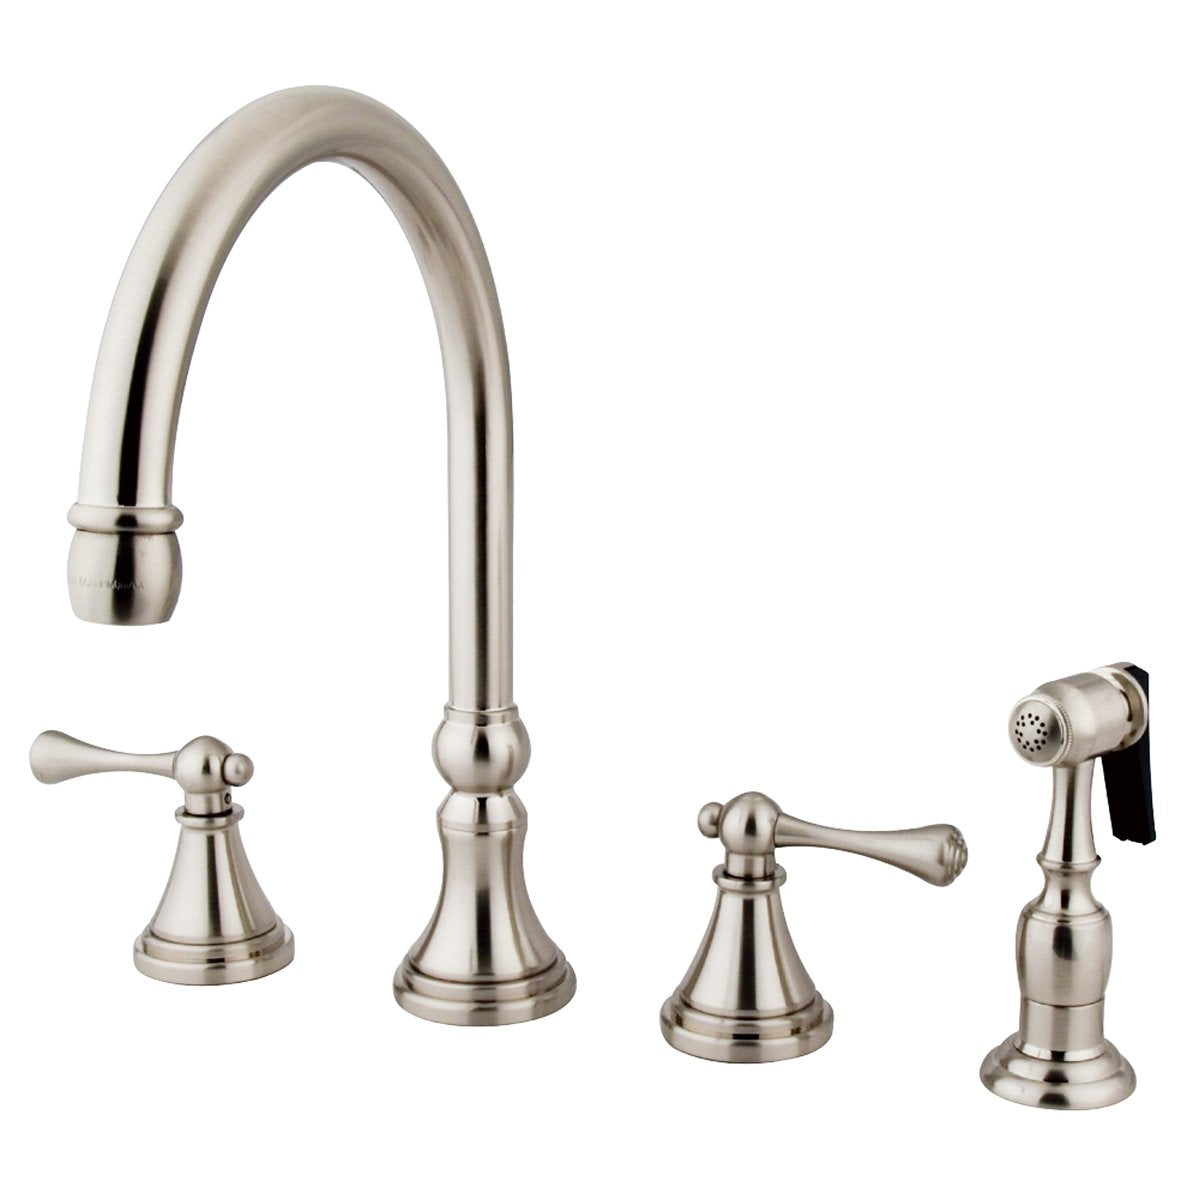 Kingston Brass Governor 8" Deck Mount Kitchen Faucet with Brass Sprayer and Lever Handle-Kitchen Faucets-Free Shipping-Directsinks.